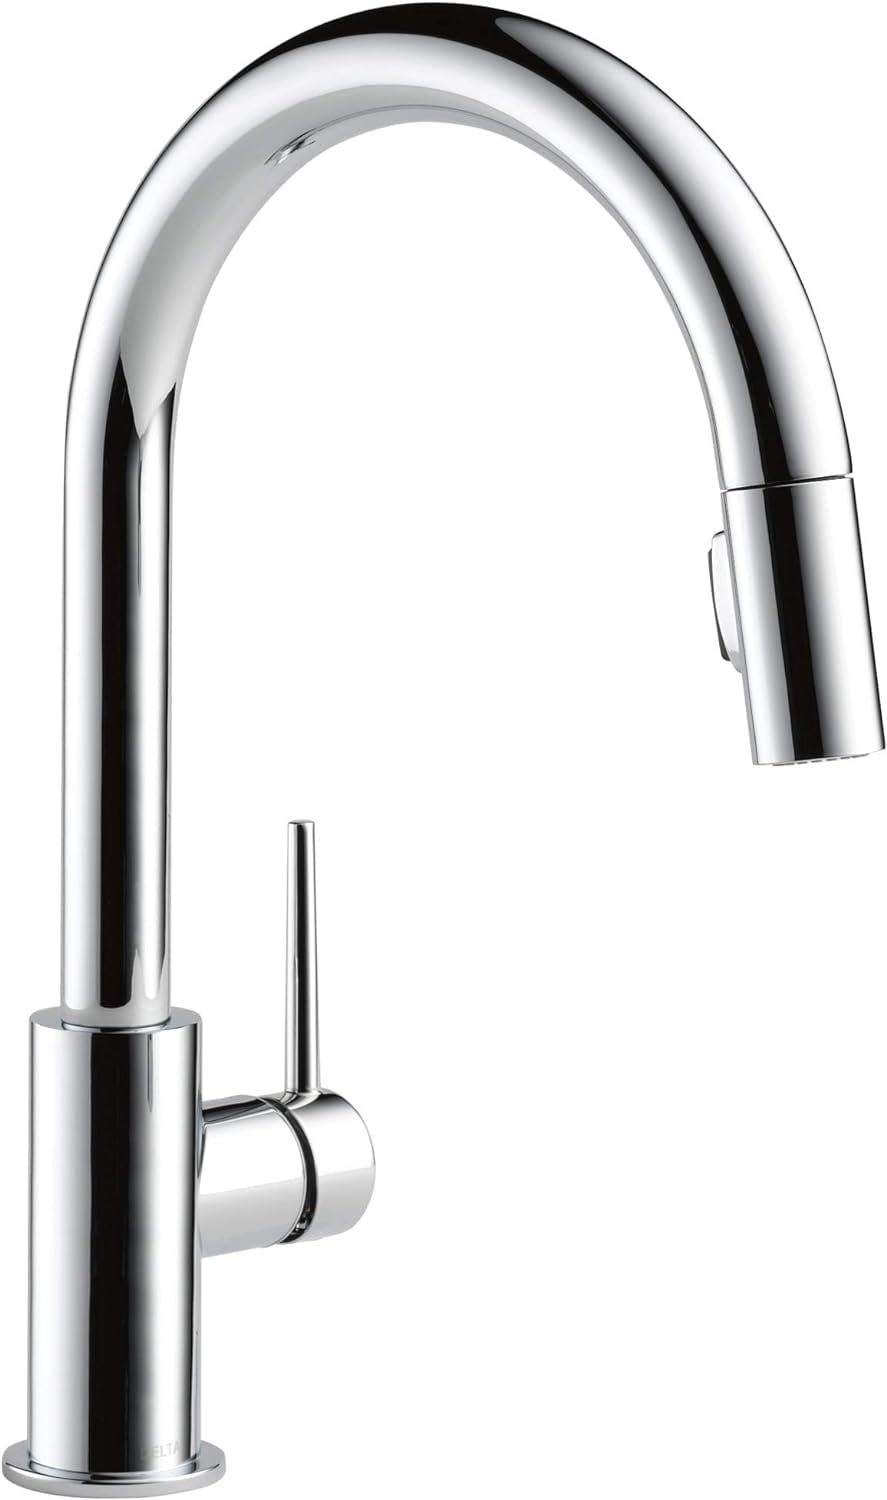 Elegant Arctic Stainless Pull-Down Kitchen Faucet with Magnetic Docking